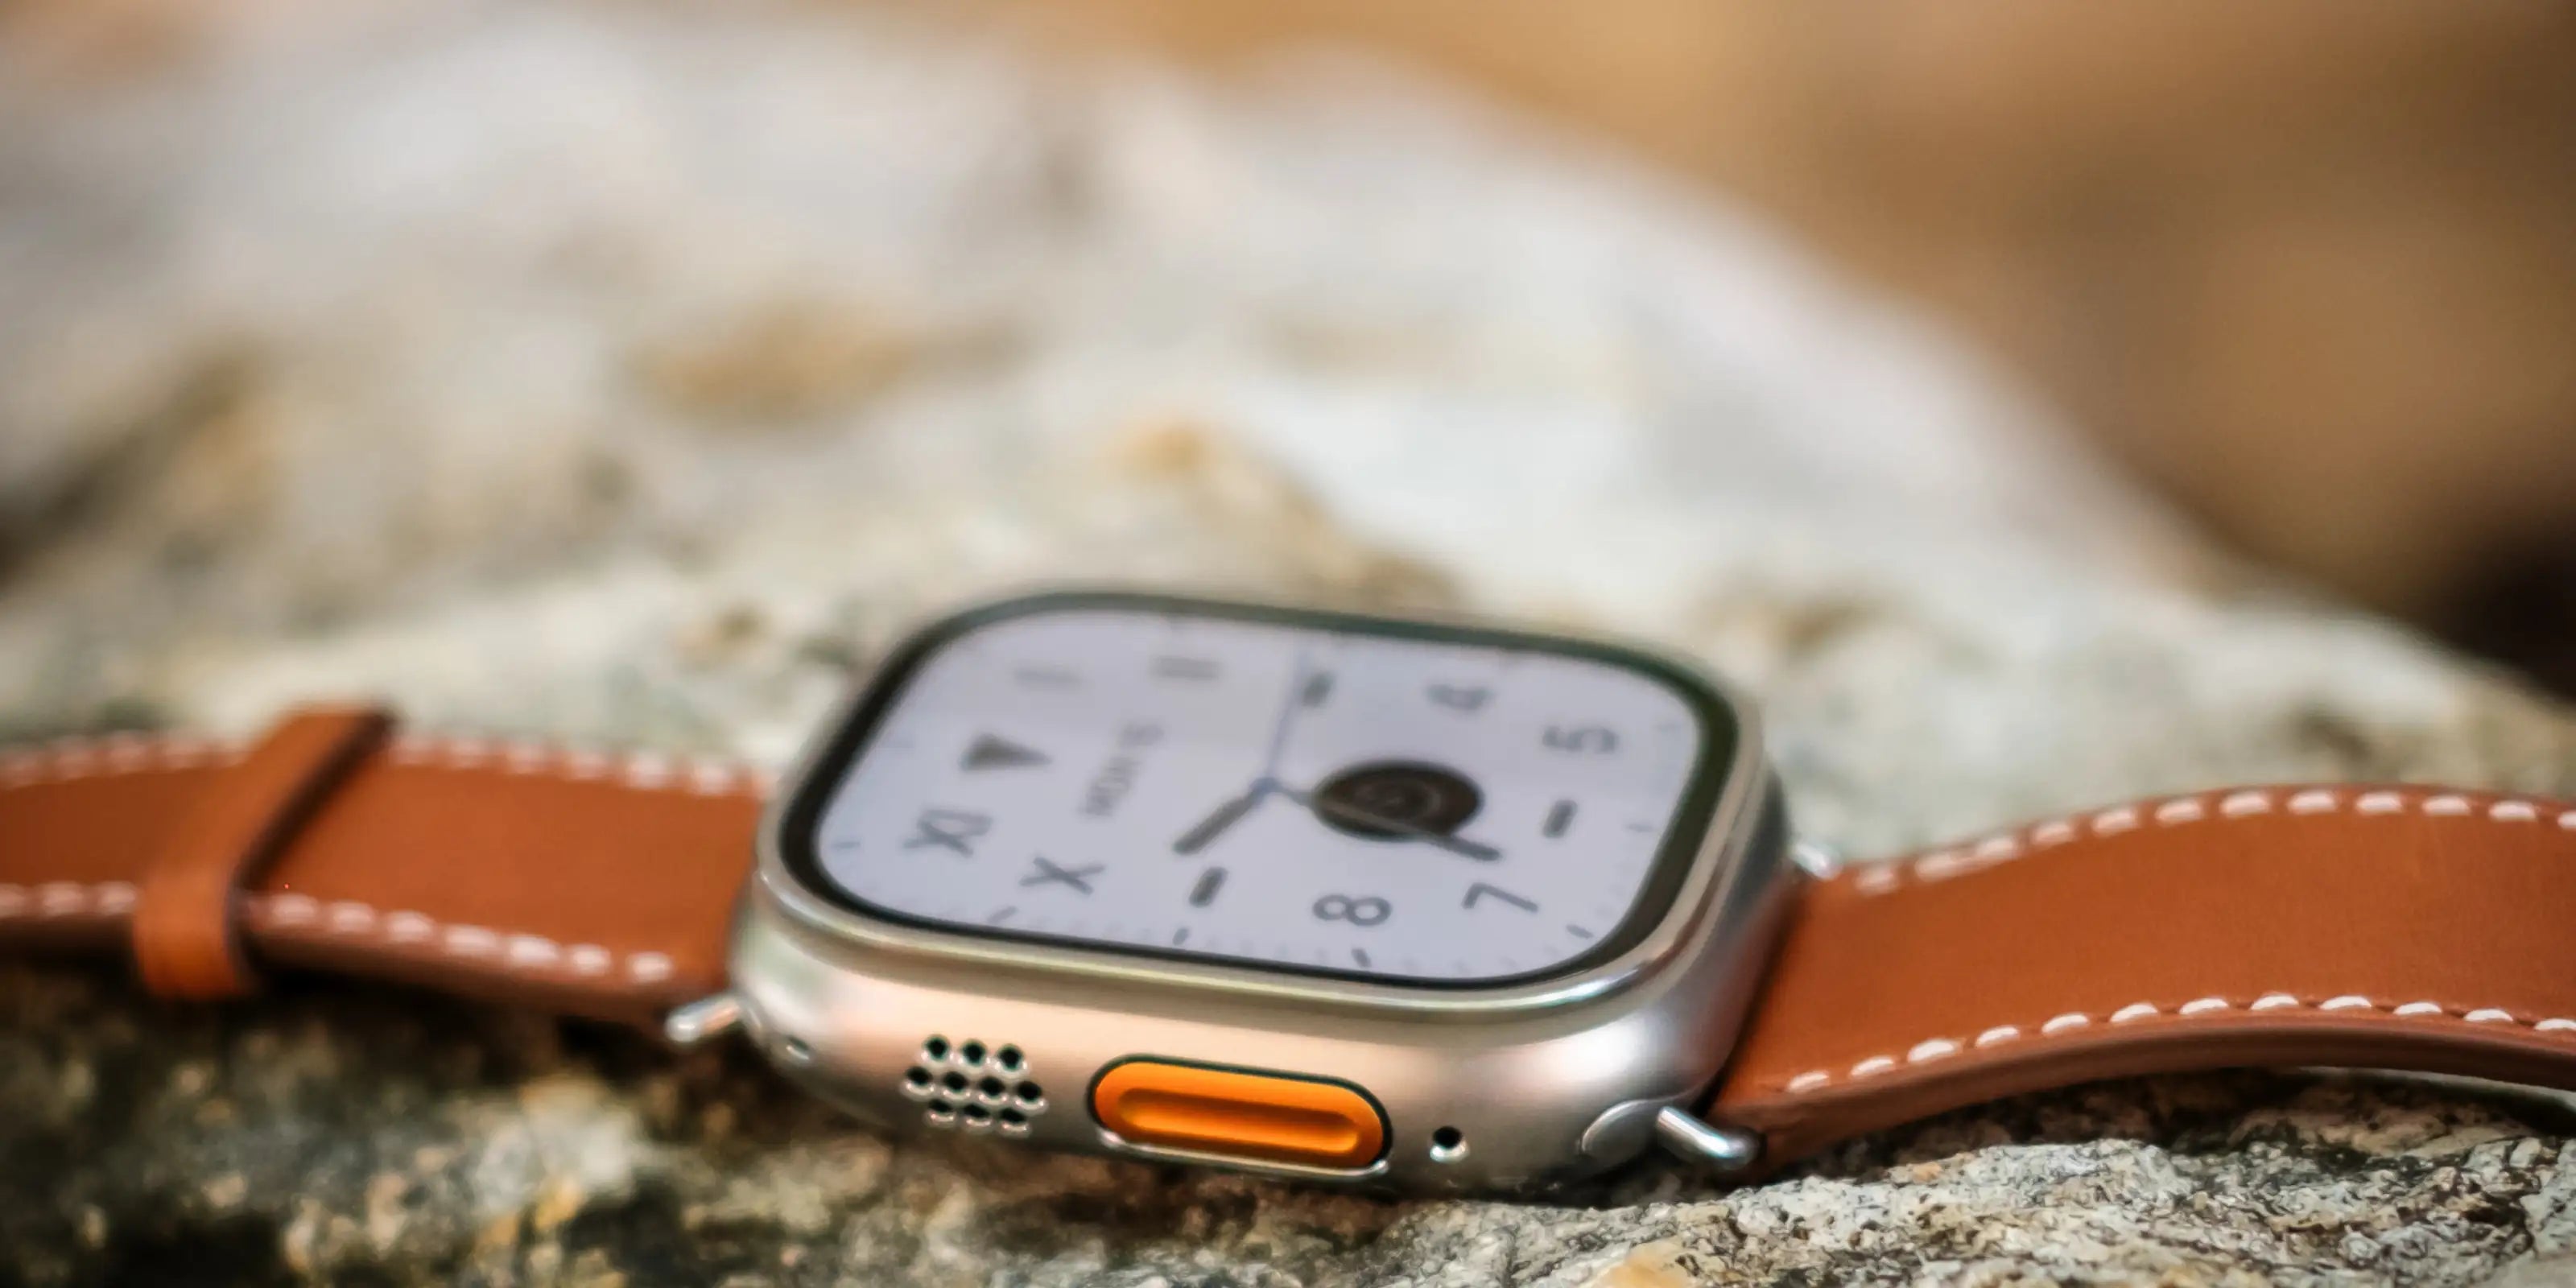 APPLE WATCH BLOG Join us on a journey through the Apple Watch world! Uncover its coolest features, top apps, and savvy tips. Whether you're an Apple Watch aficionado or just getting started, there's something here for everyone.